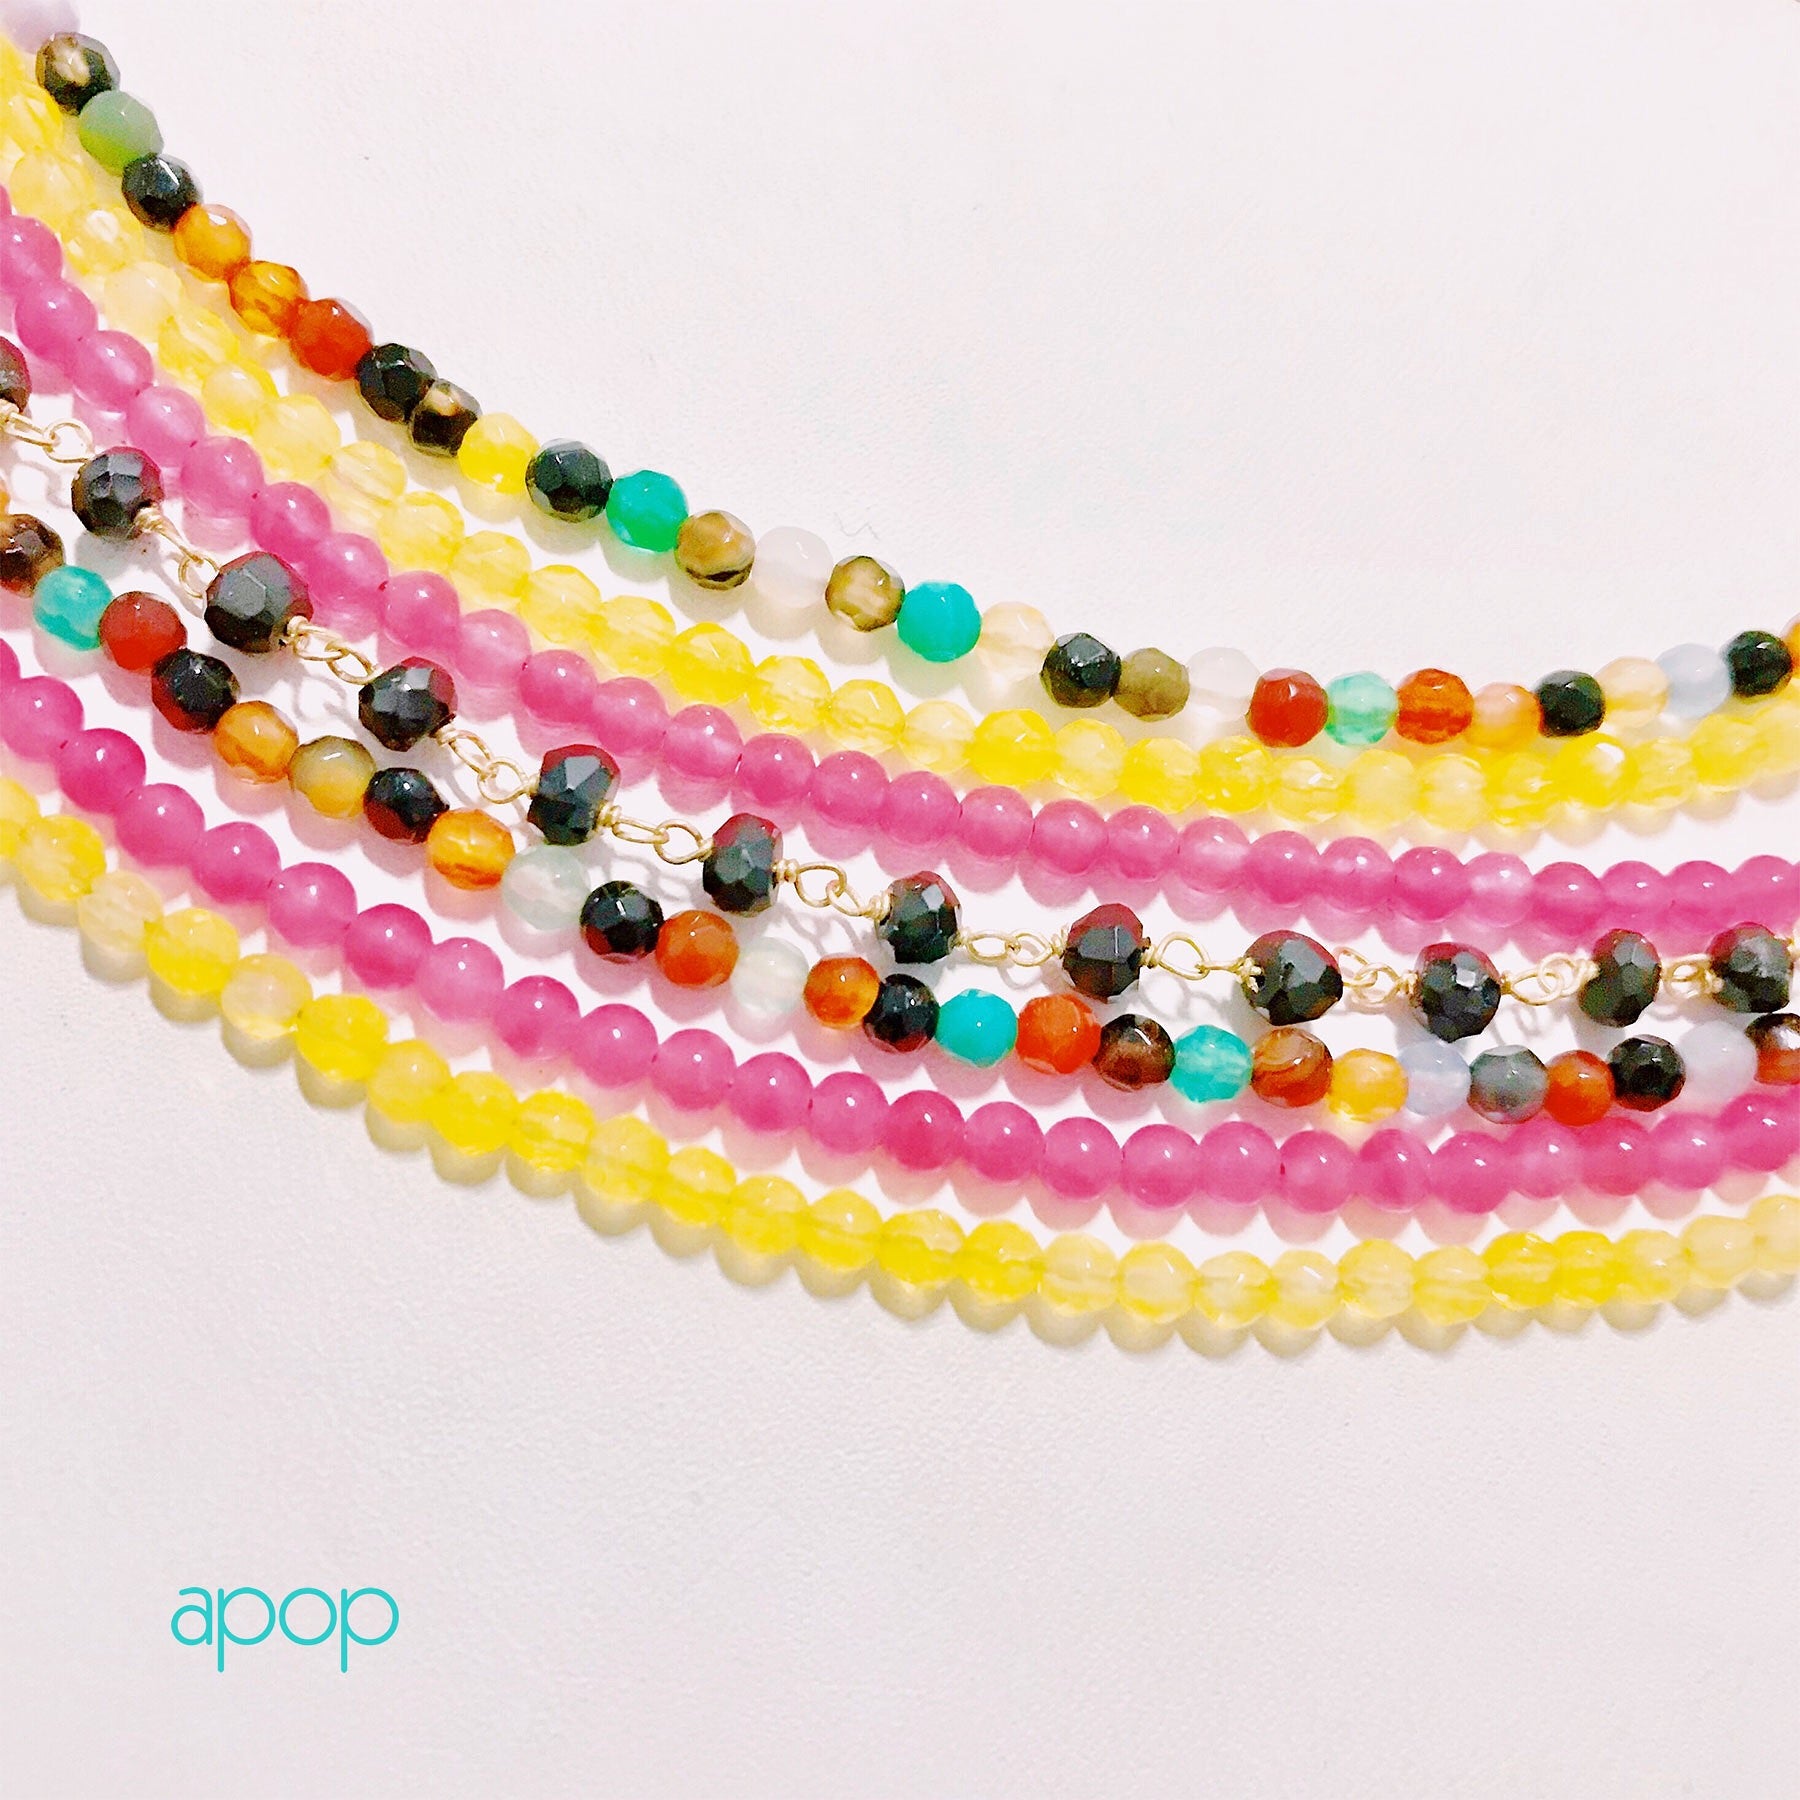 The Best Colorful Beaded Necklaces | POPSUGAR Fashion